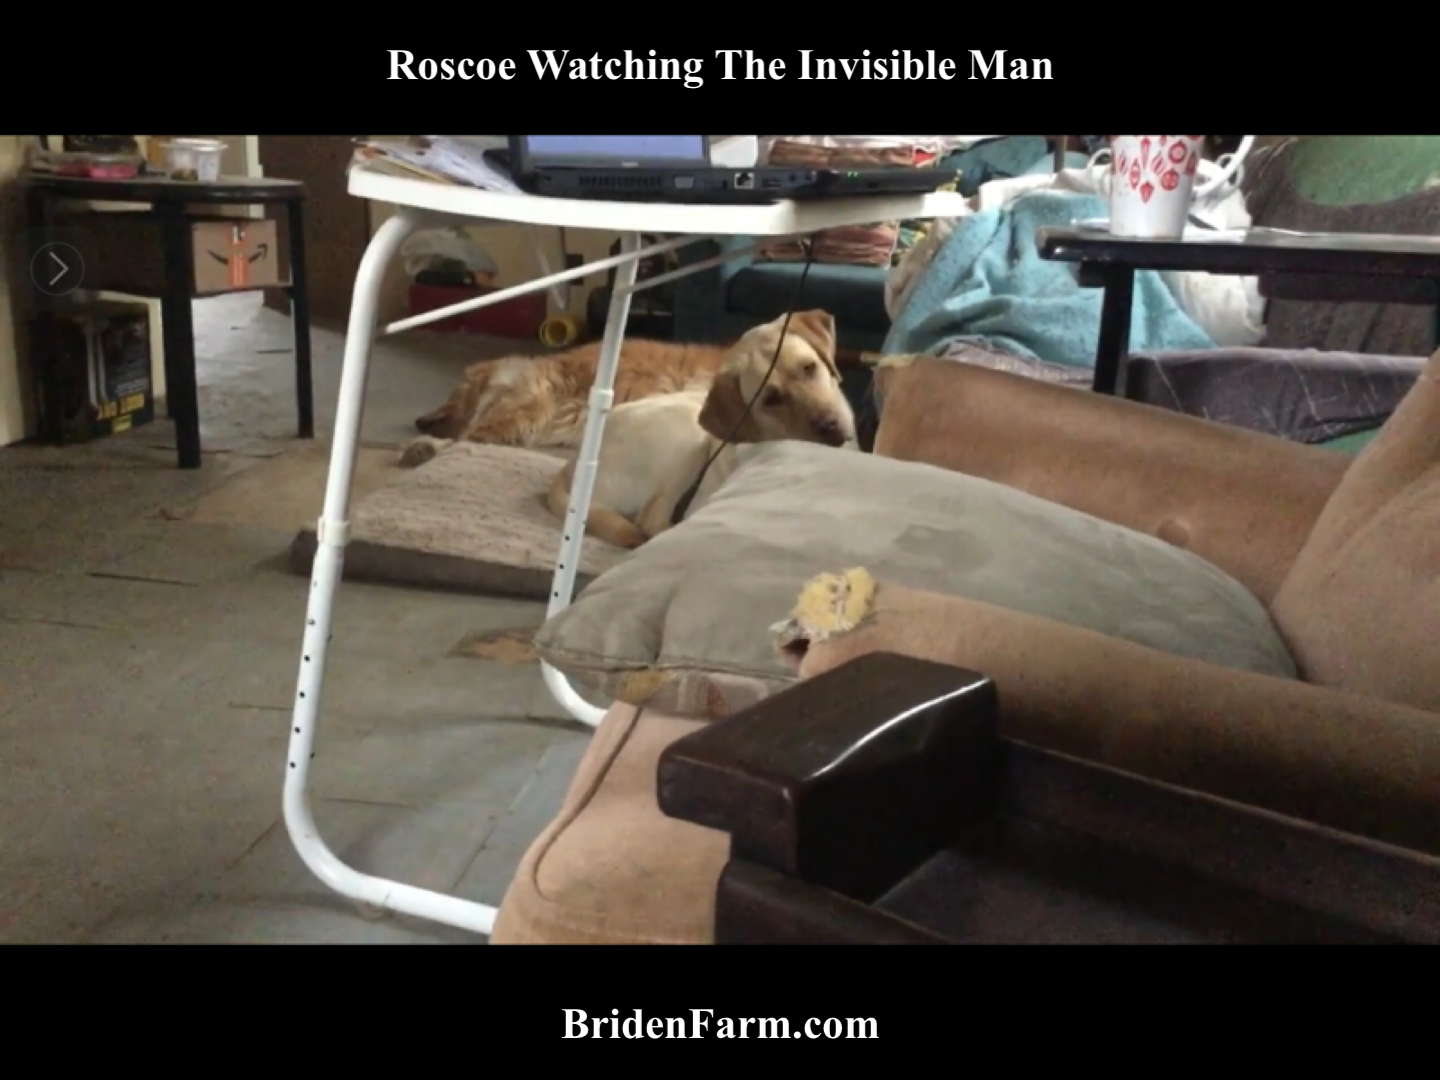 Roscoe Watching The Invisible Man